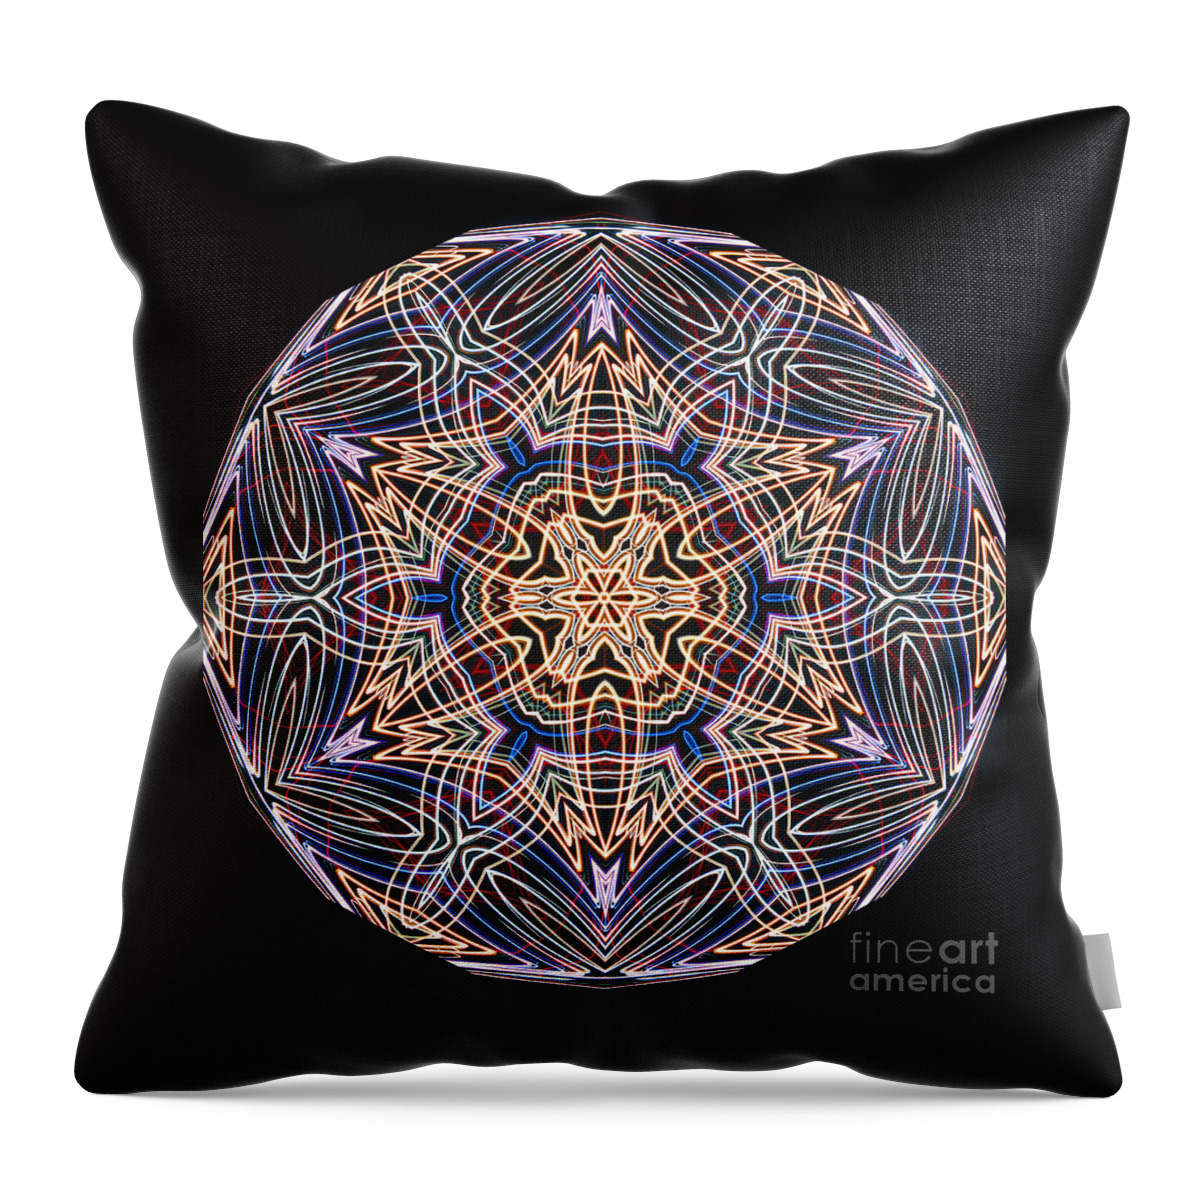 Mandala Throw Pillow featuring the digital art Neon Blue Lines Shaping Form by Wernher Krutein